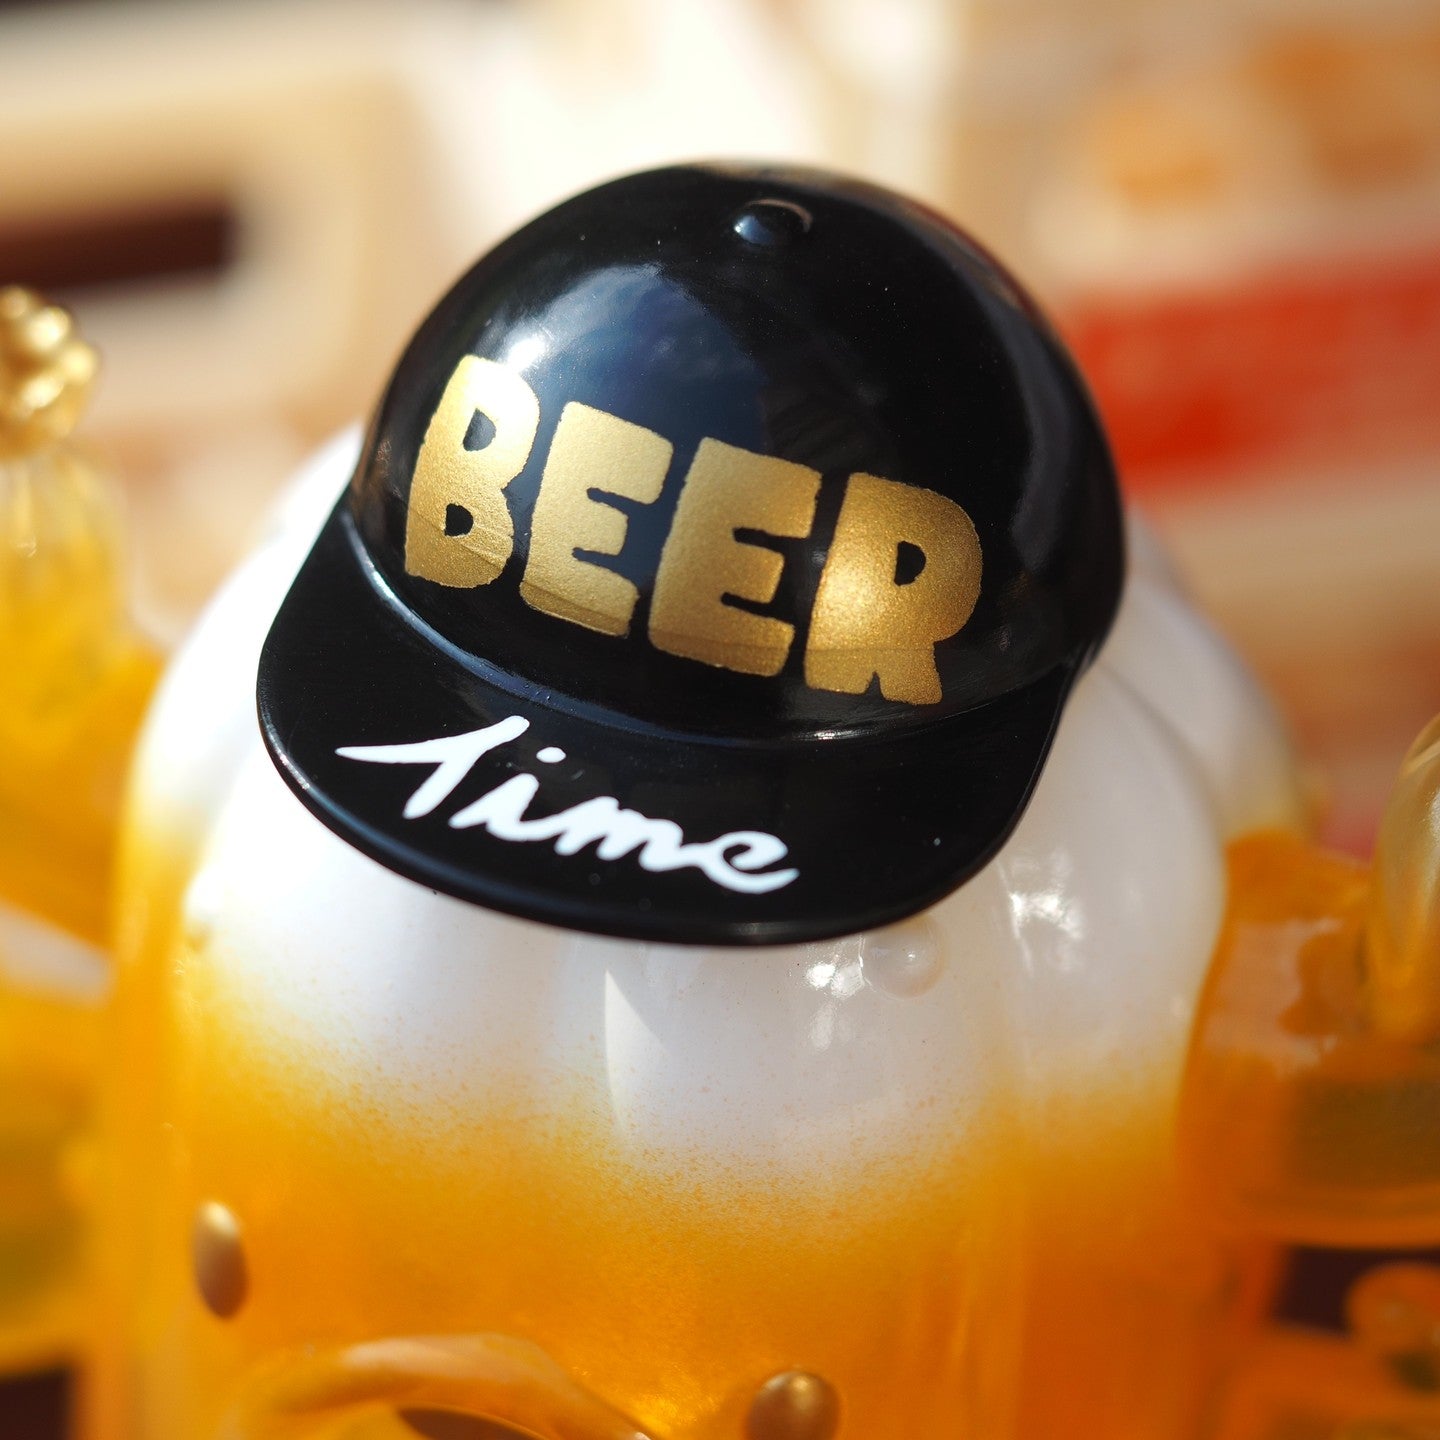 A black and white hat with gold text, a plastic toy resembling a hat, and a beer bottle in close-up. Product: BEER PATU, Soft Vinyl, 10 cm tall.